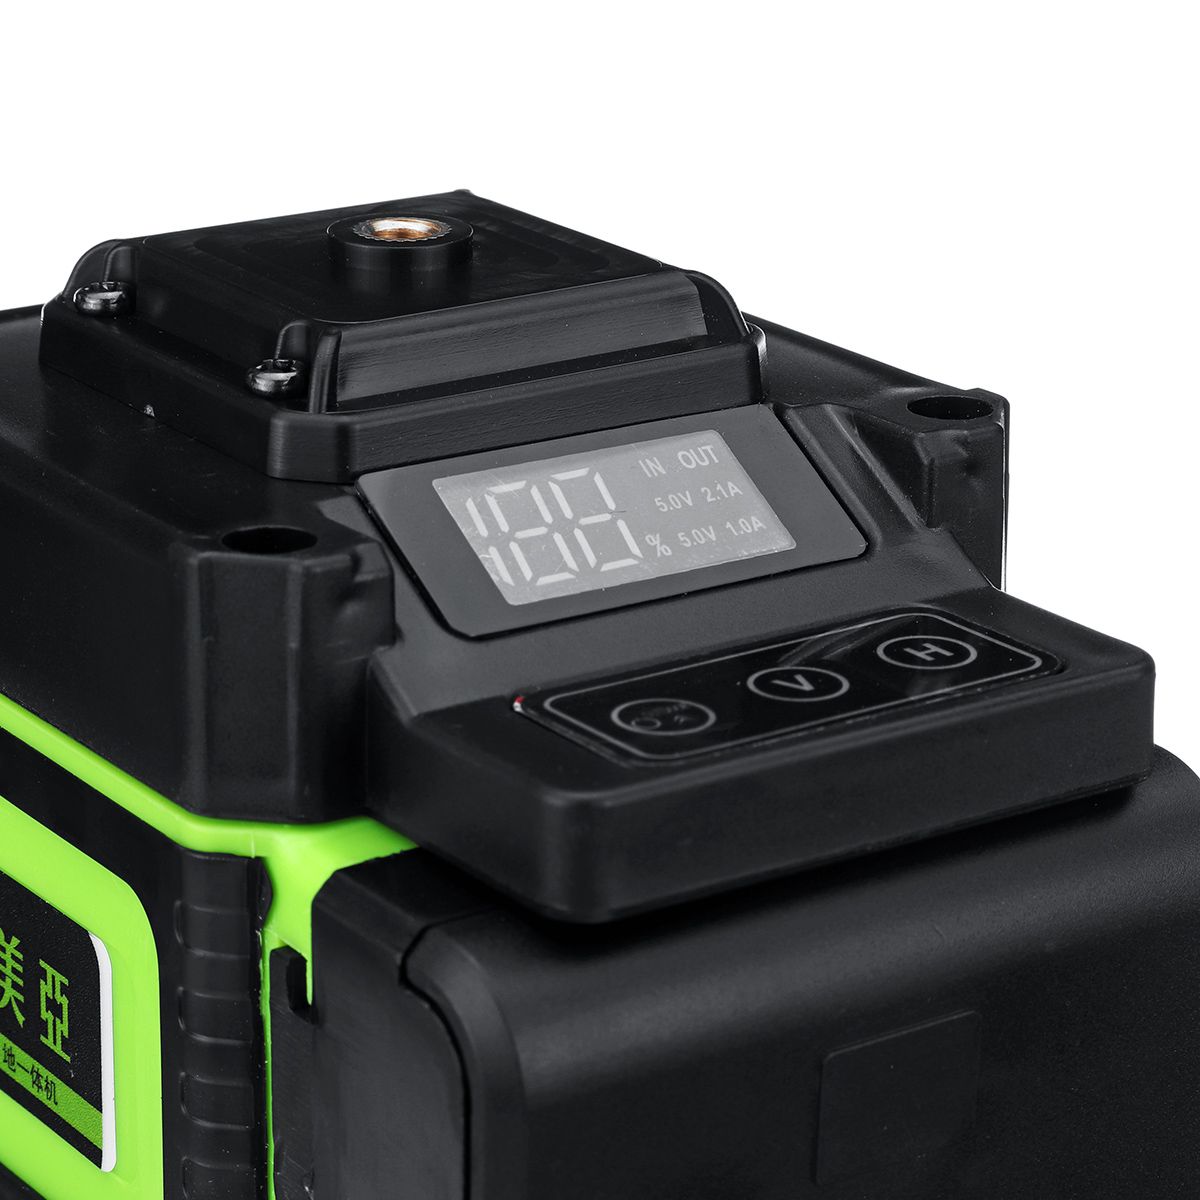 16-Lines-Laser-Level-Measuring-DevicesLine-360-Degree-Rotary-Horizontal-And-Vertical-Cross-Laser-Lev-1545641